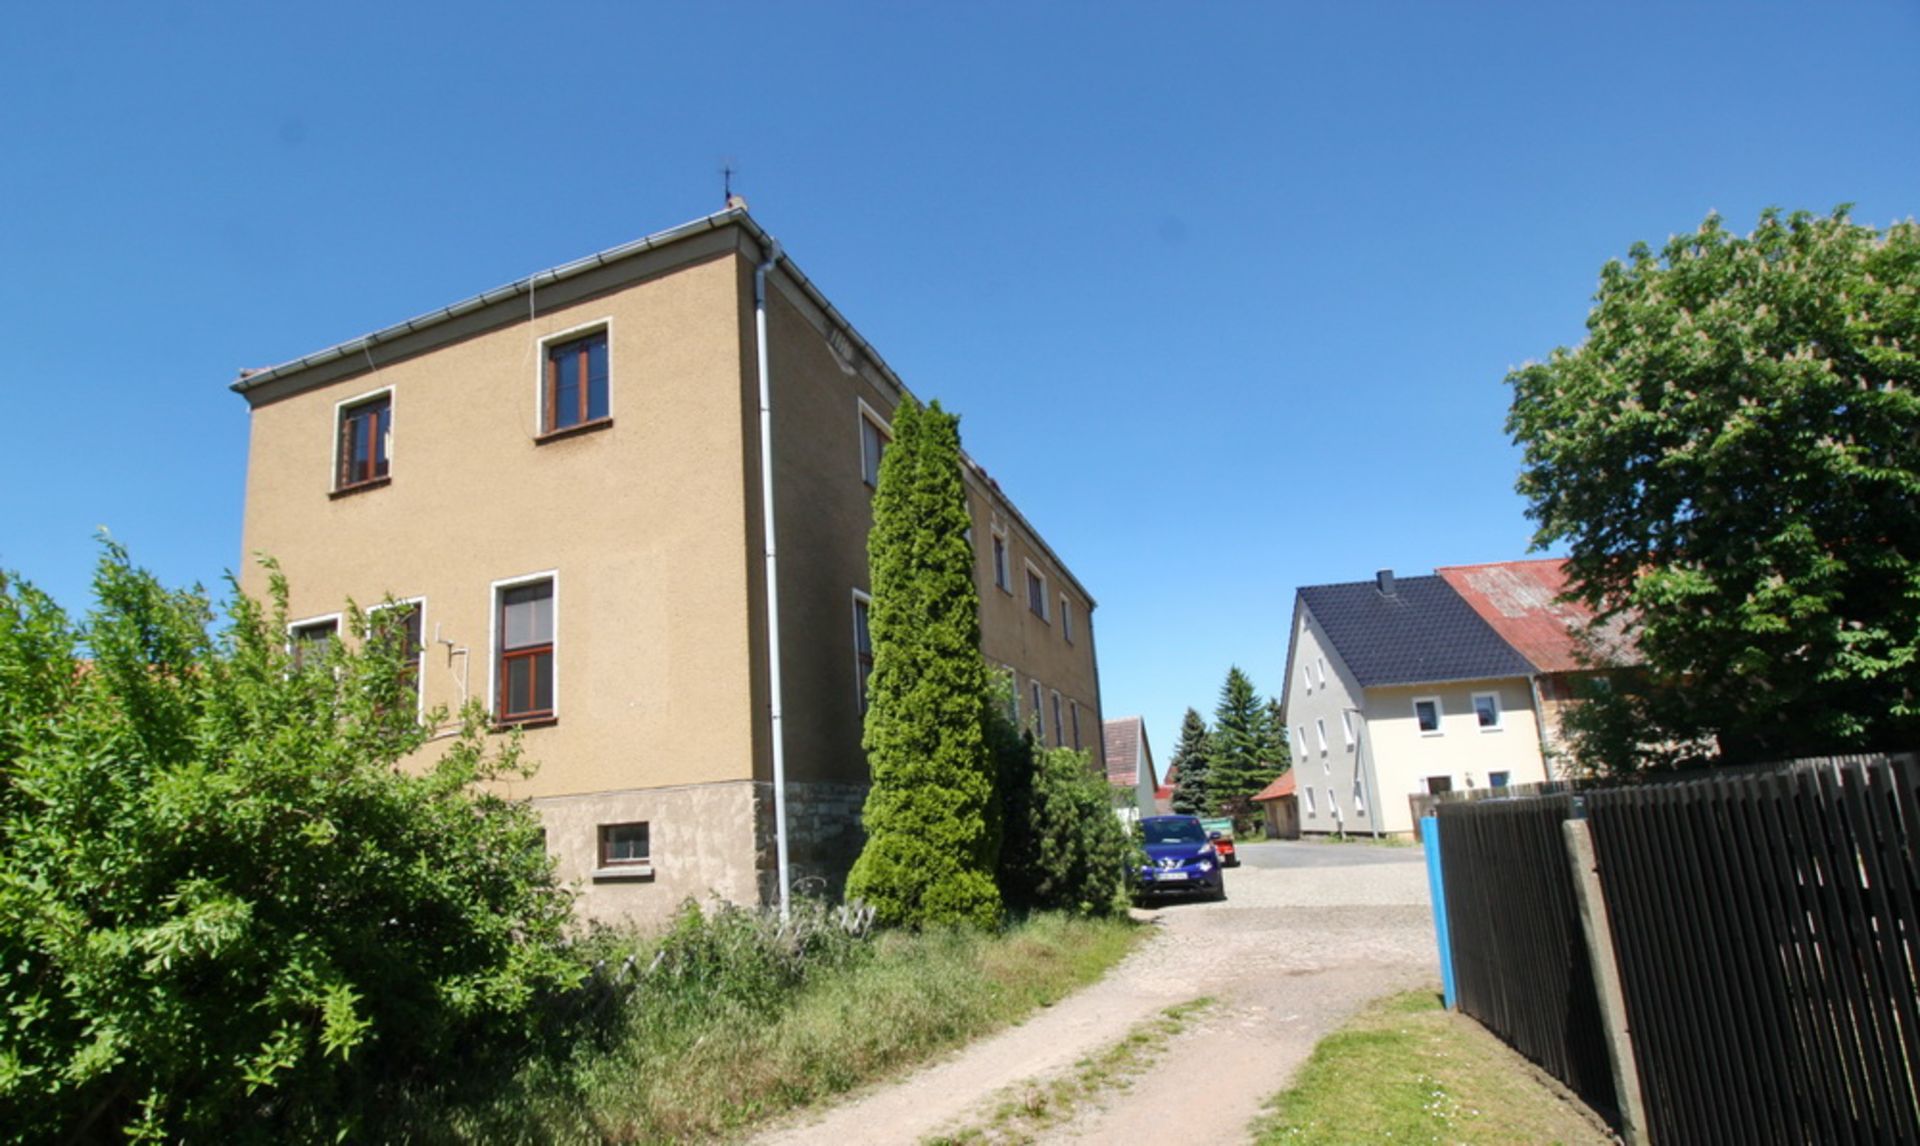 LARGE HOUSING BLOCK HORNSOMMEM, GERMANY READY TO MOVE INTO FREEHOLD VACANT POSSESSION - Image 26 of 91